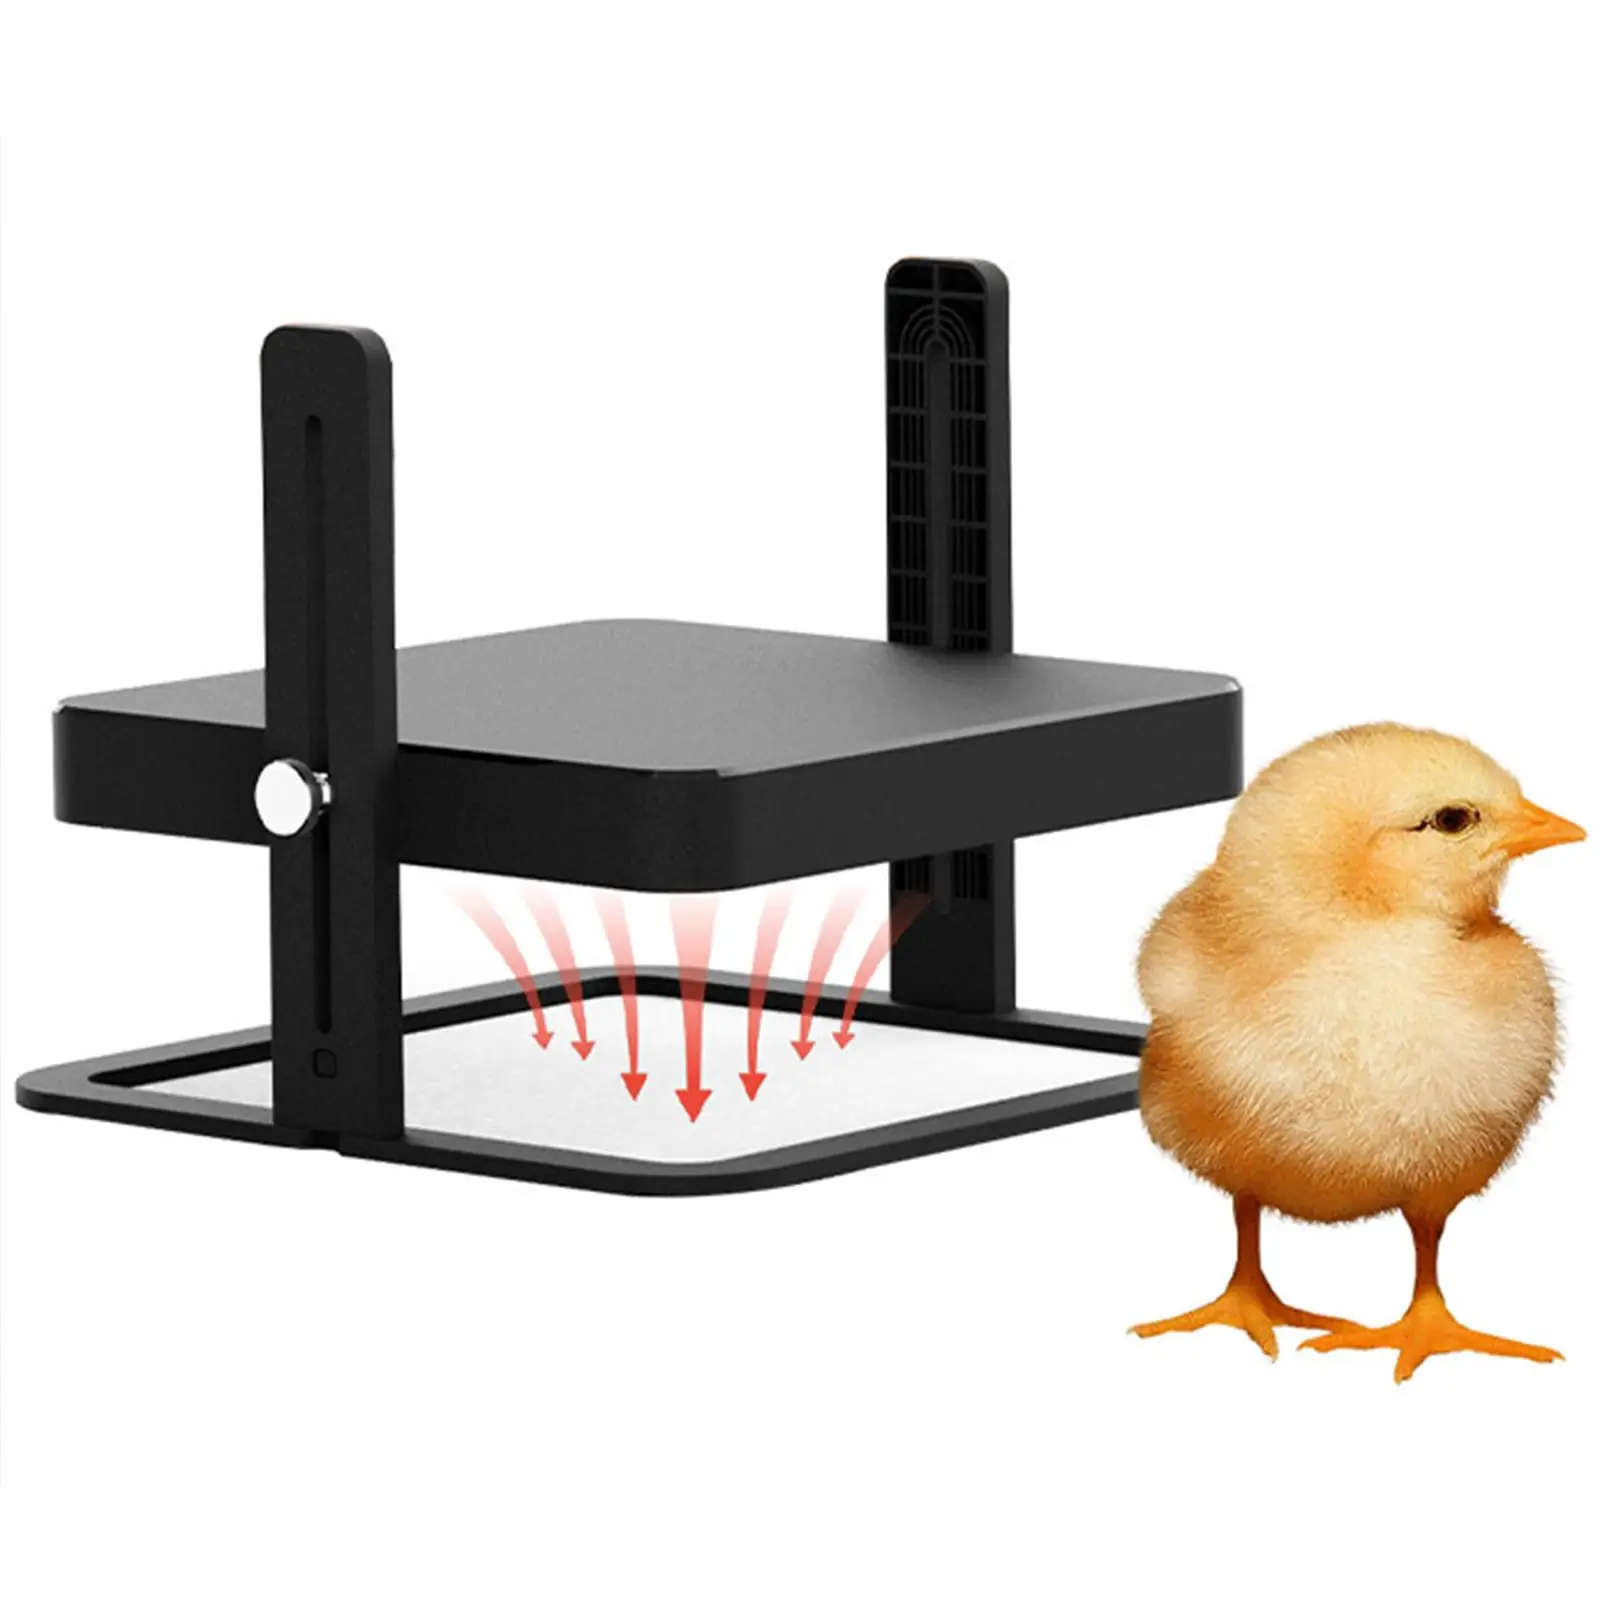 Chick Brooder Heating Board Adjustable Height Angle Hen Pet Supplies Incubator Breeding Keeping Warm for Chicken Hen Poultry